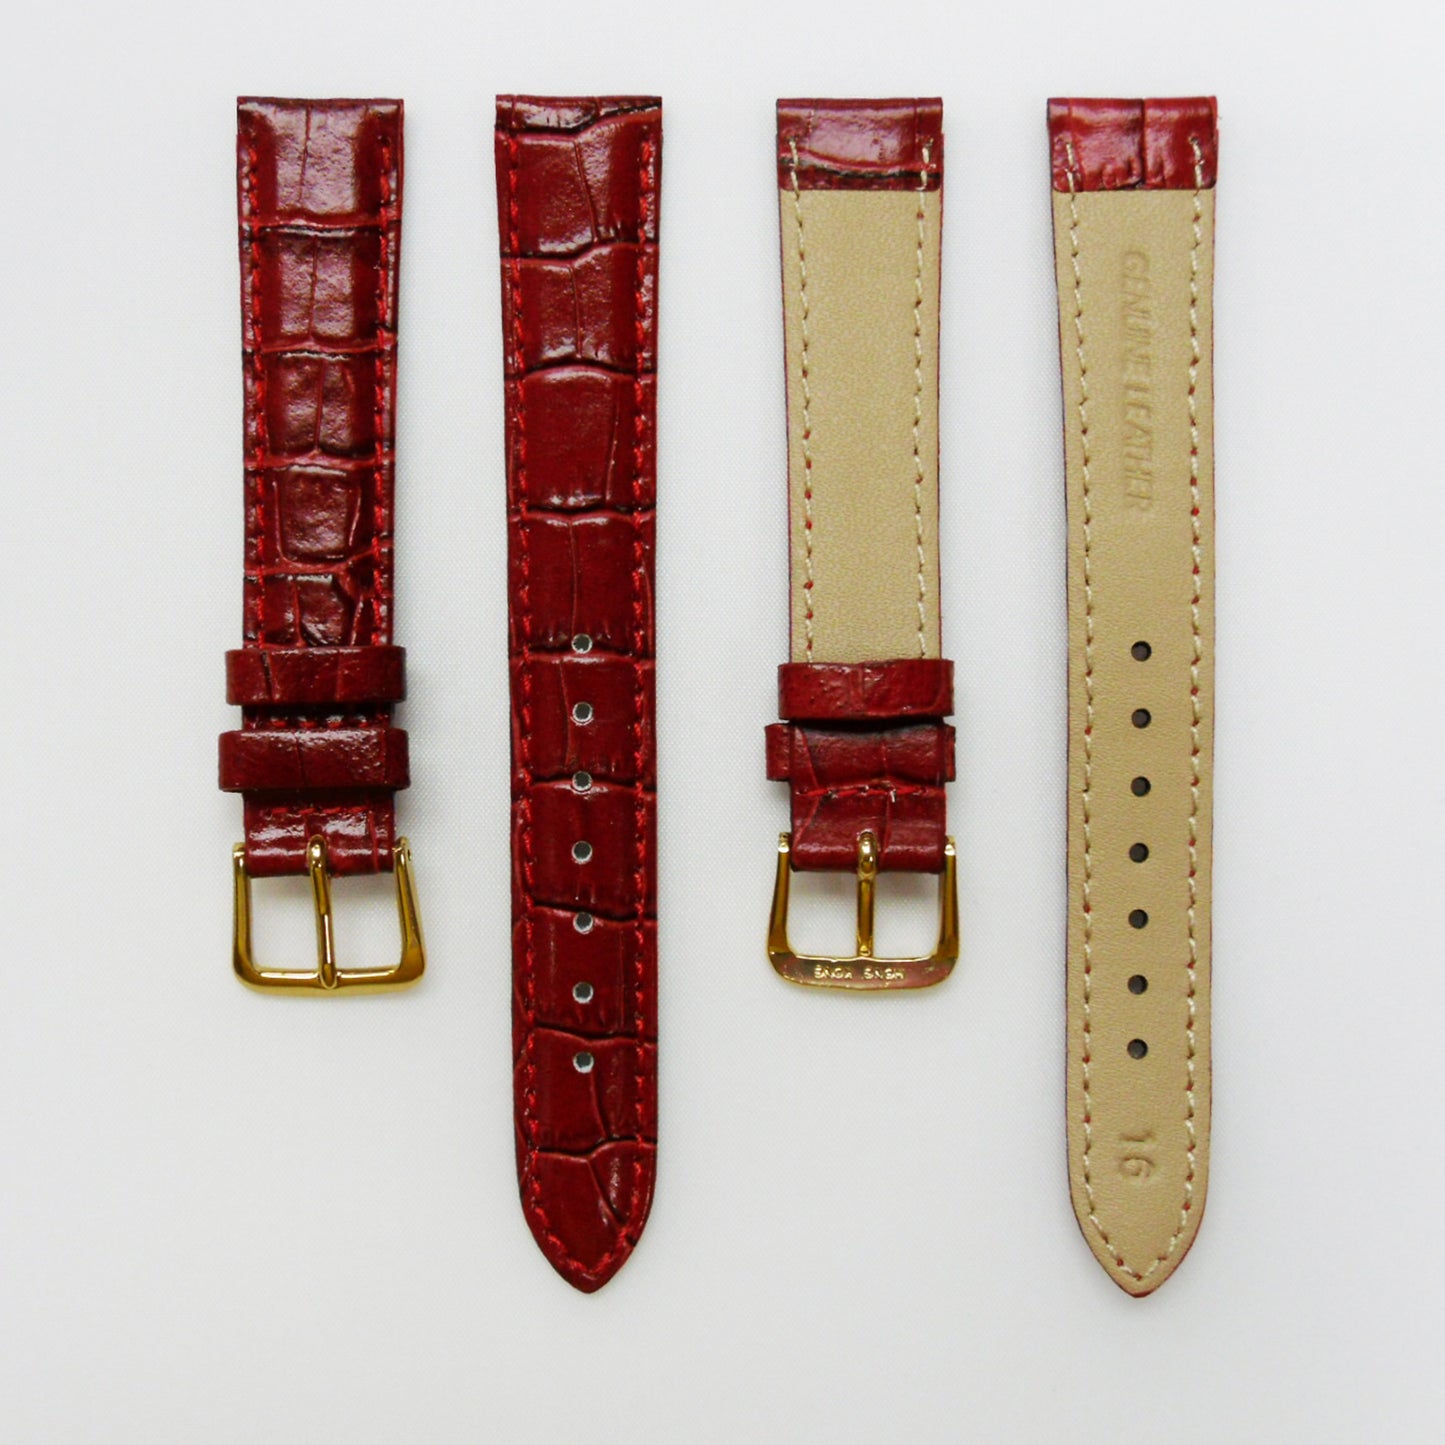 Crocodile Watch Grain Strap For Men 16 MM Band Red Color, Regular Size, Watch Band Replacement